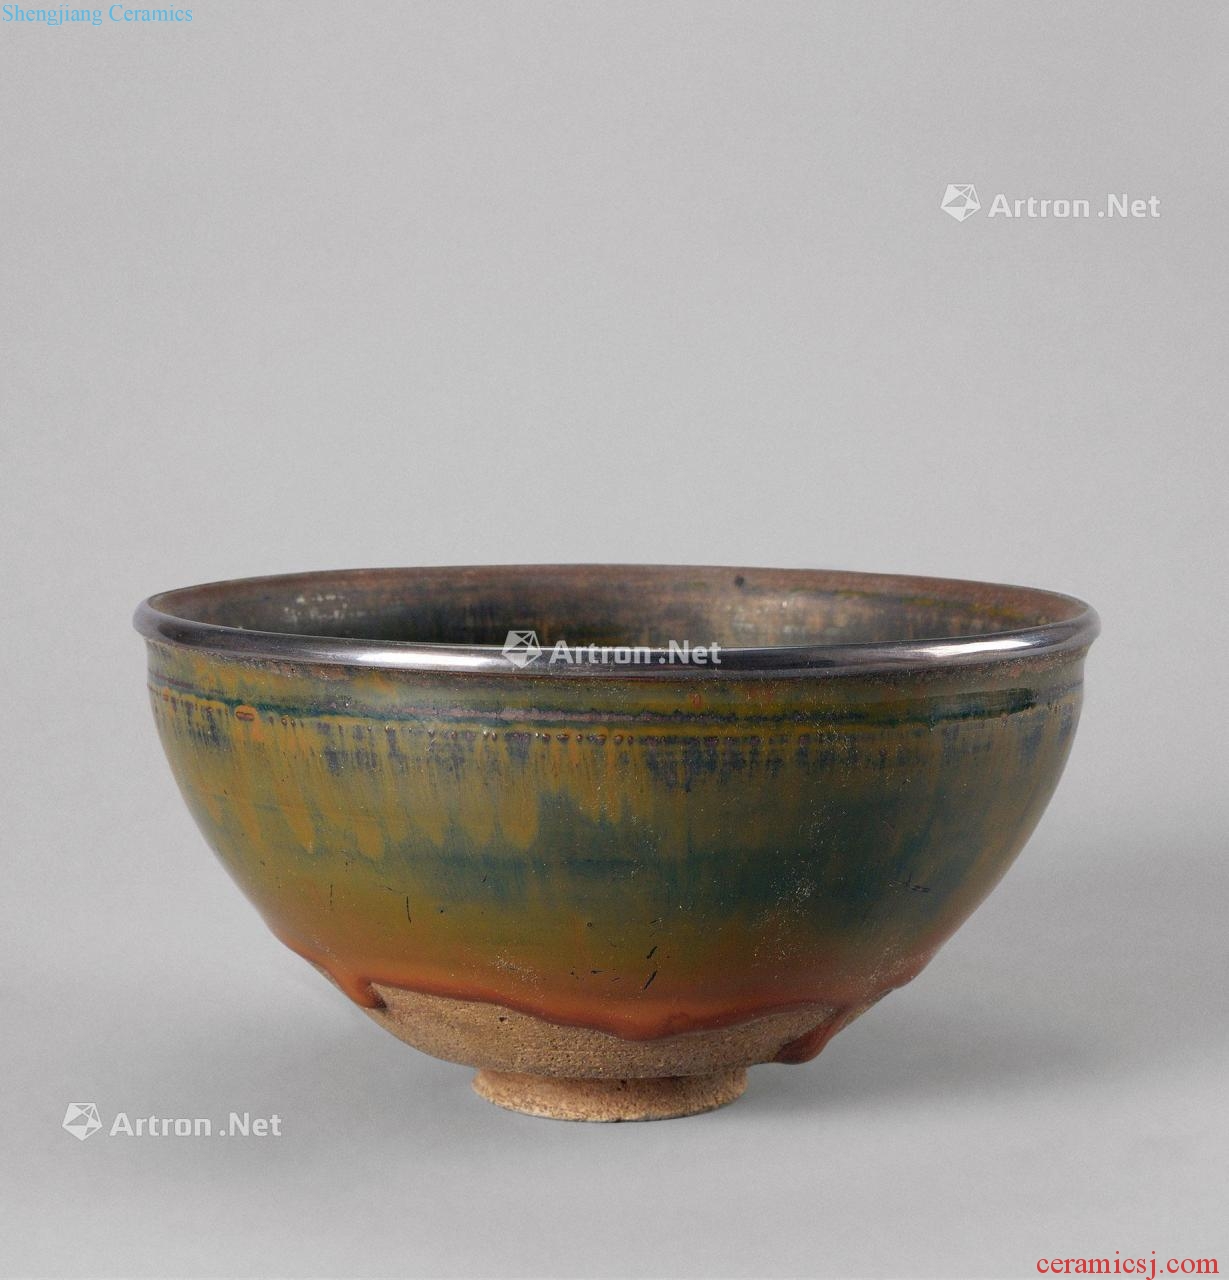 The southern song dynasty silvering mouth temmoku bowl